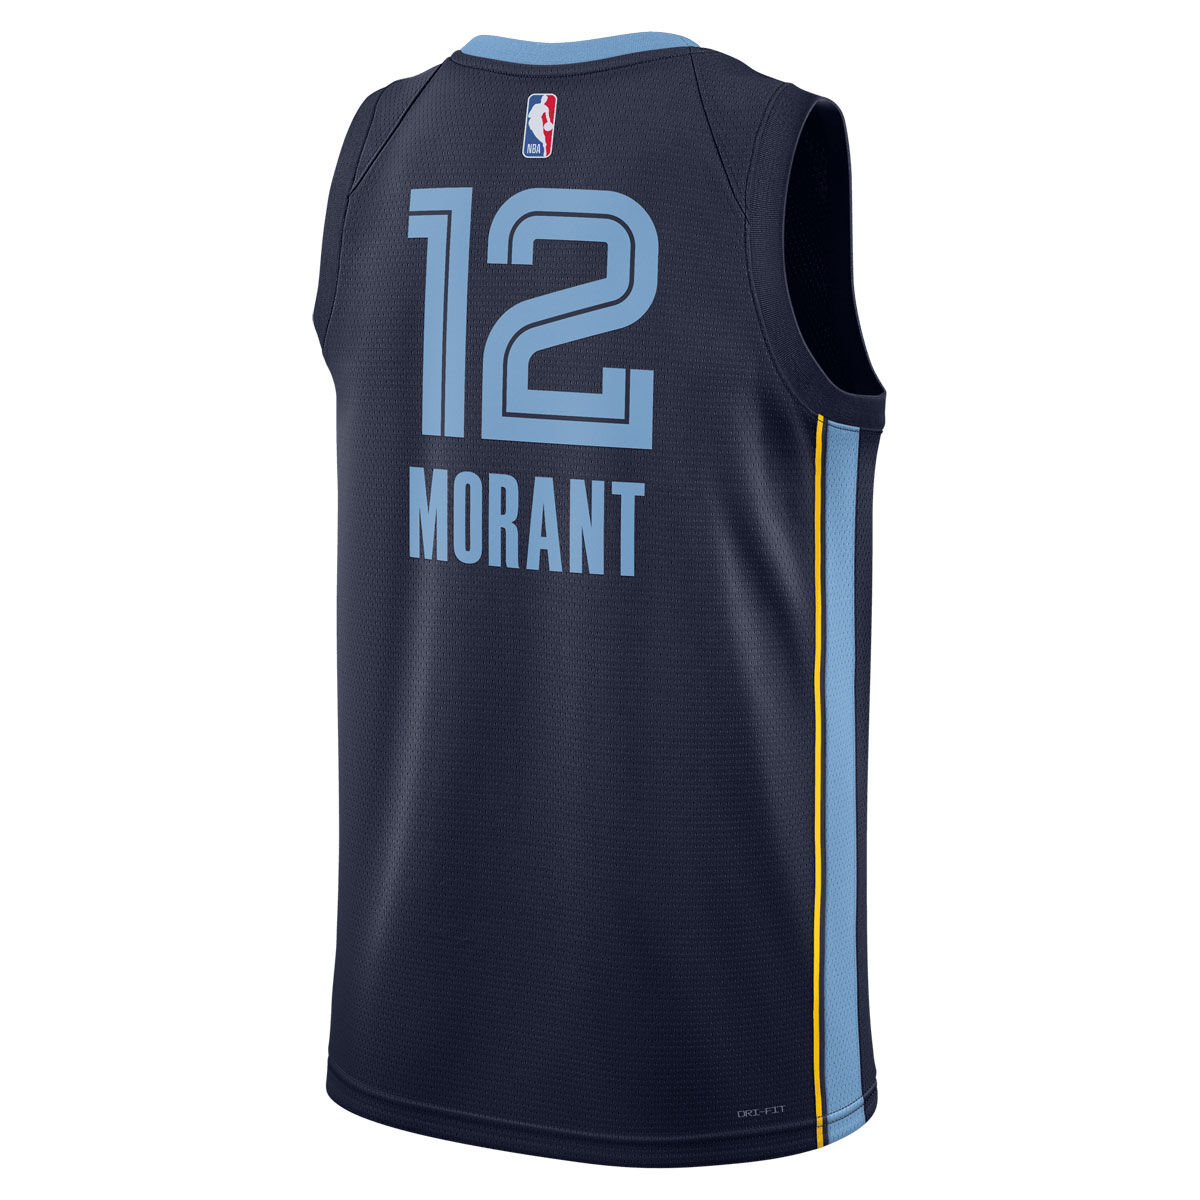 Vancouver Grizzlies Ja Morant #12 Nba Throwback Green White Jersey